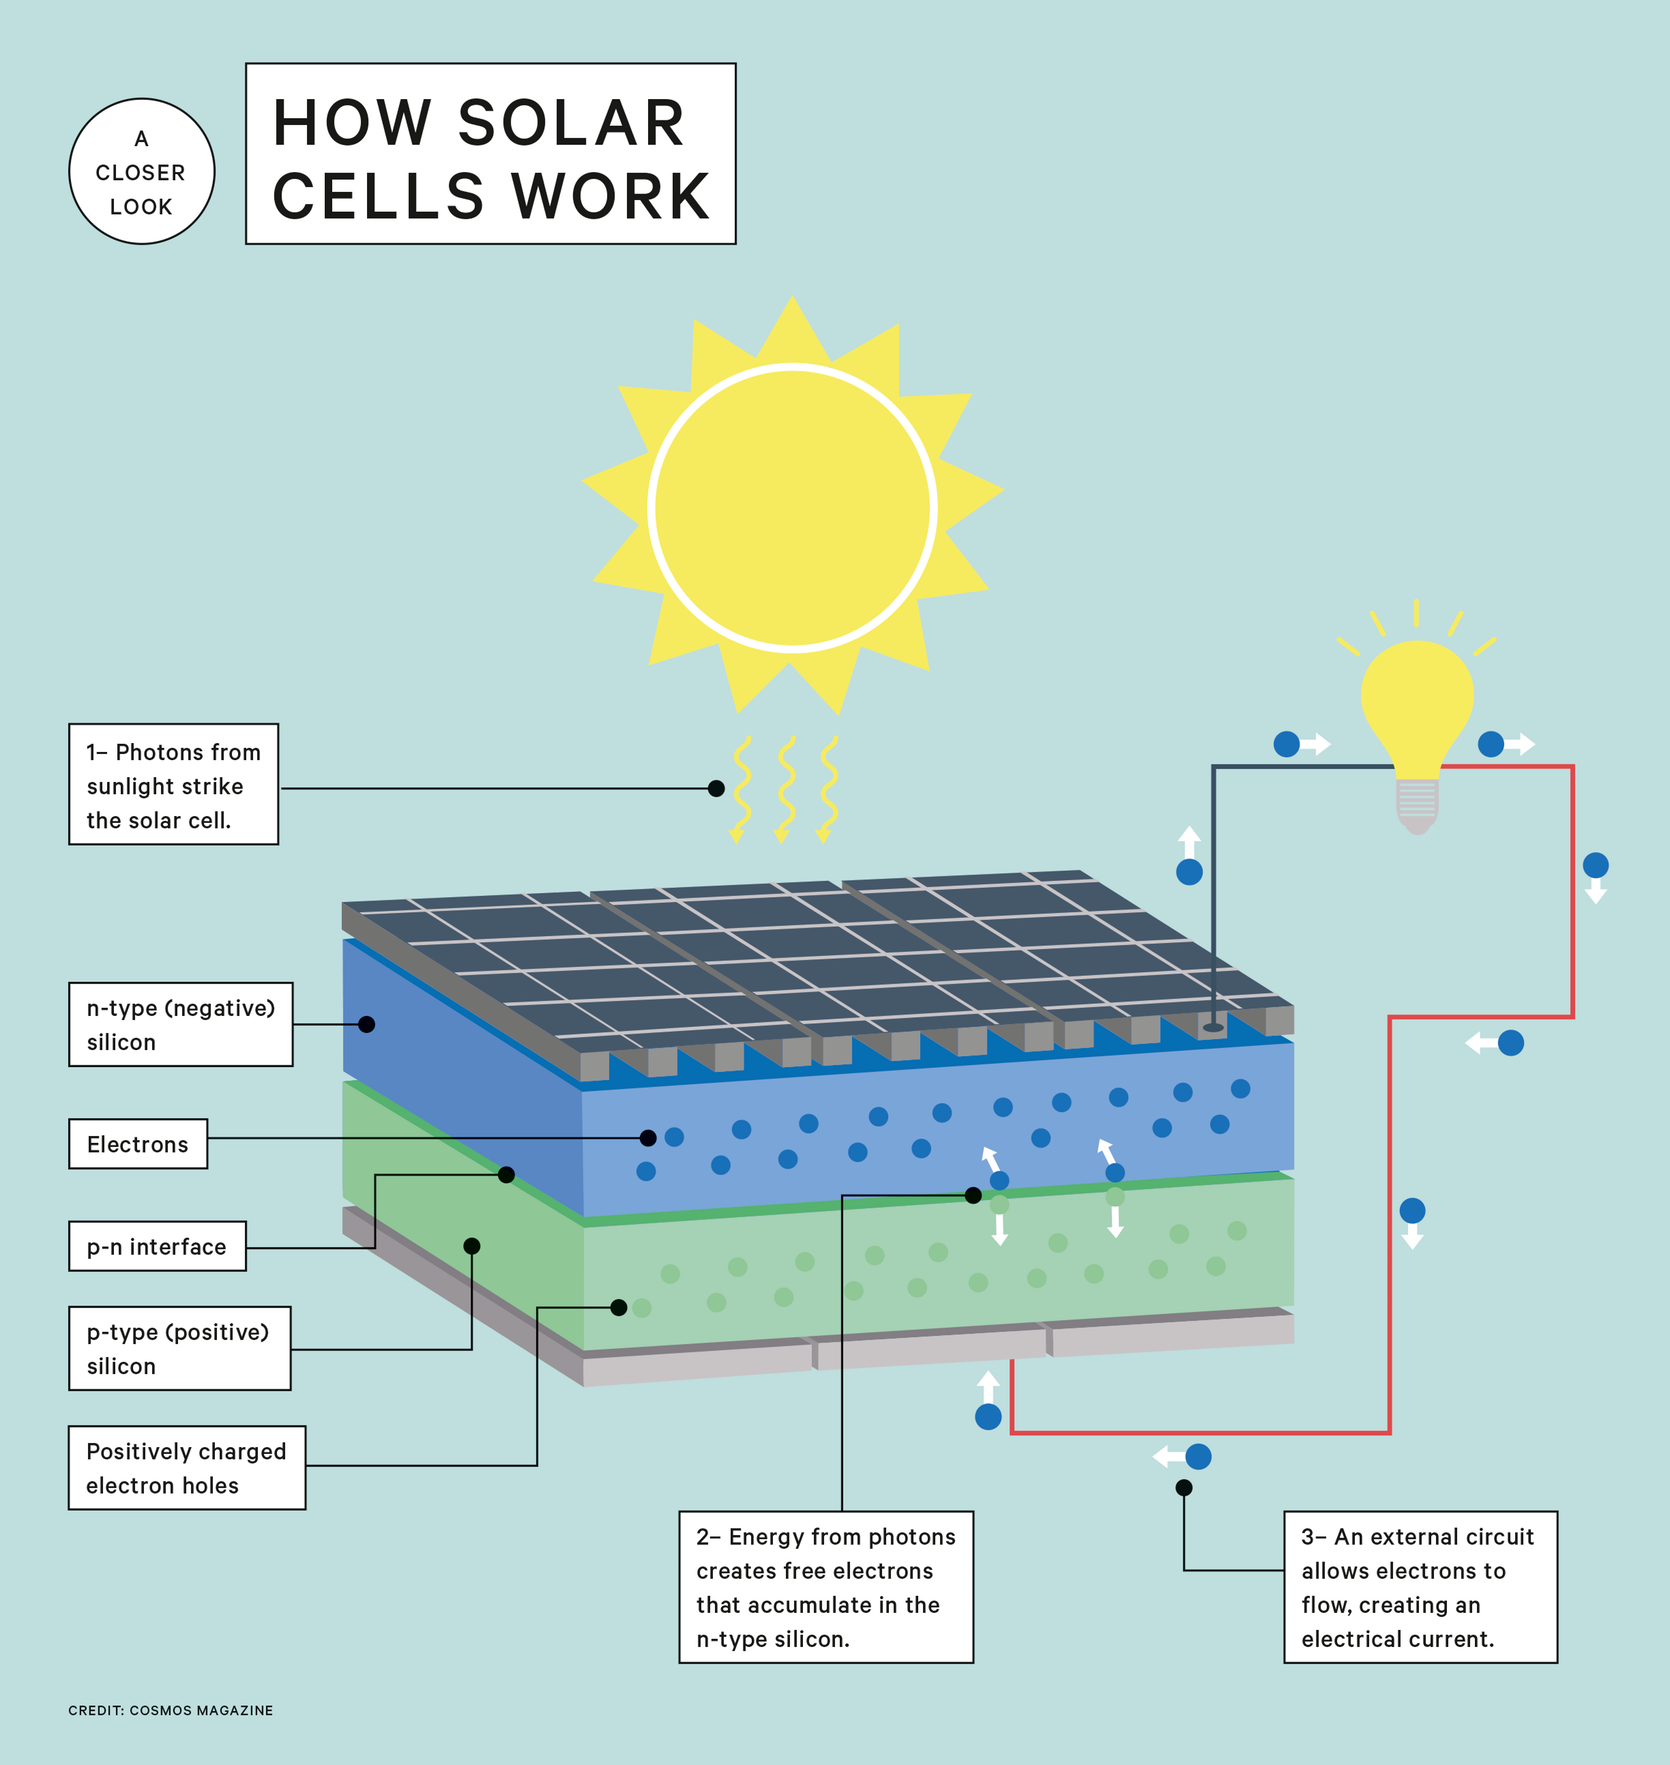 How solar cells turn sunlight into electricity